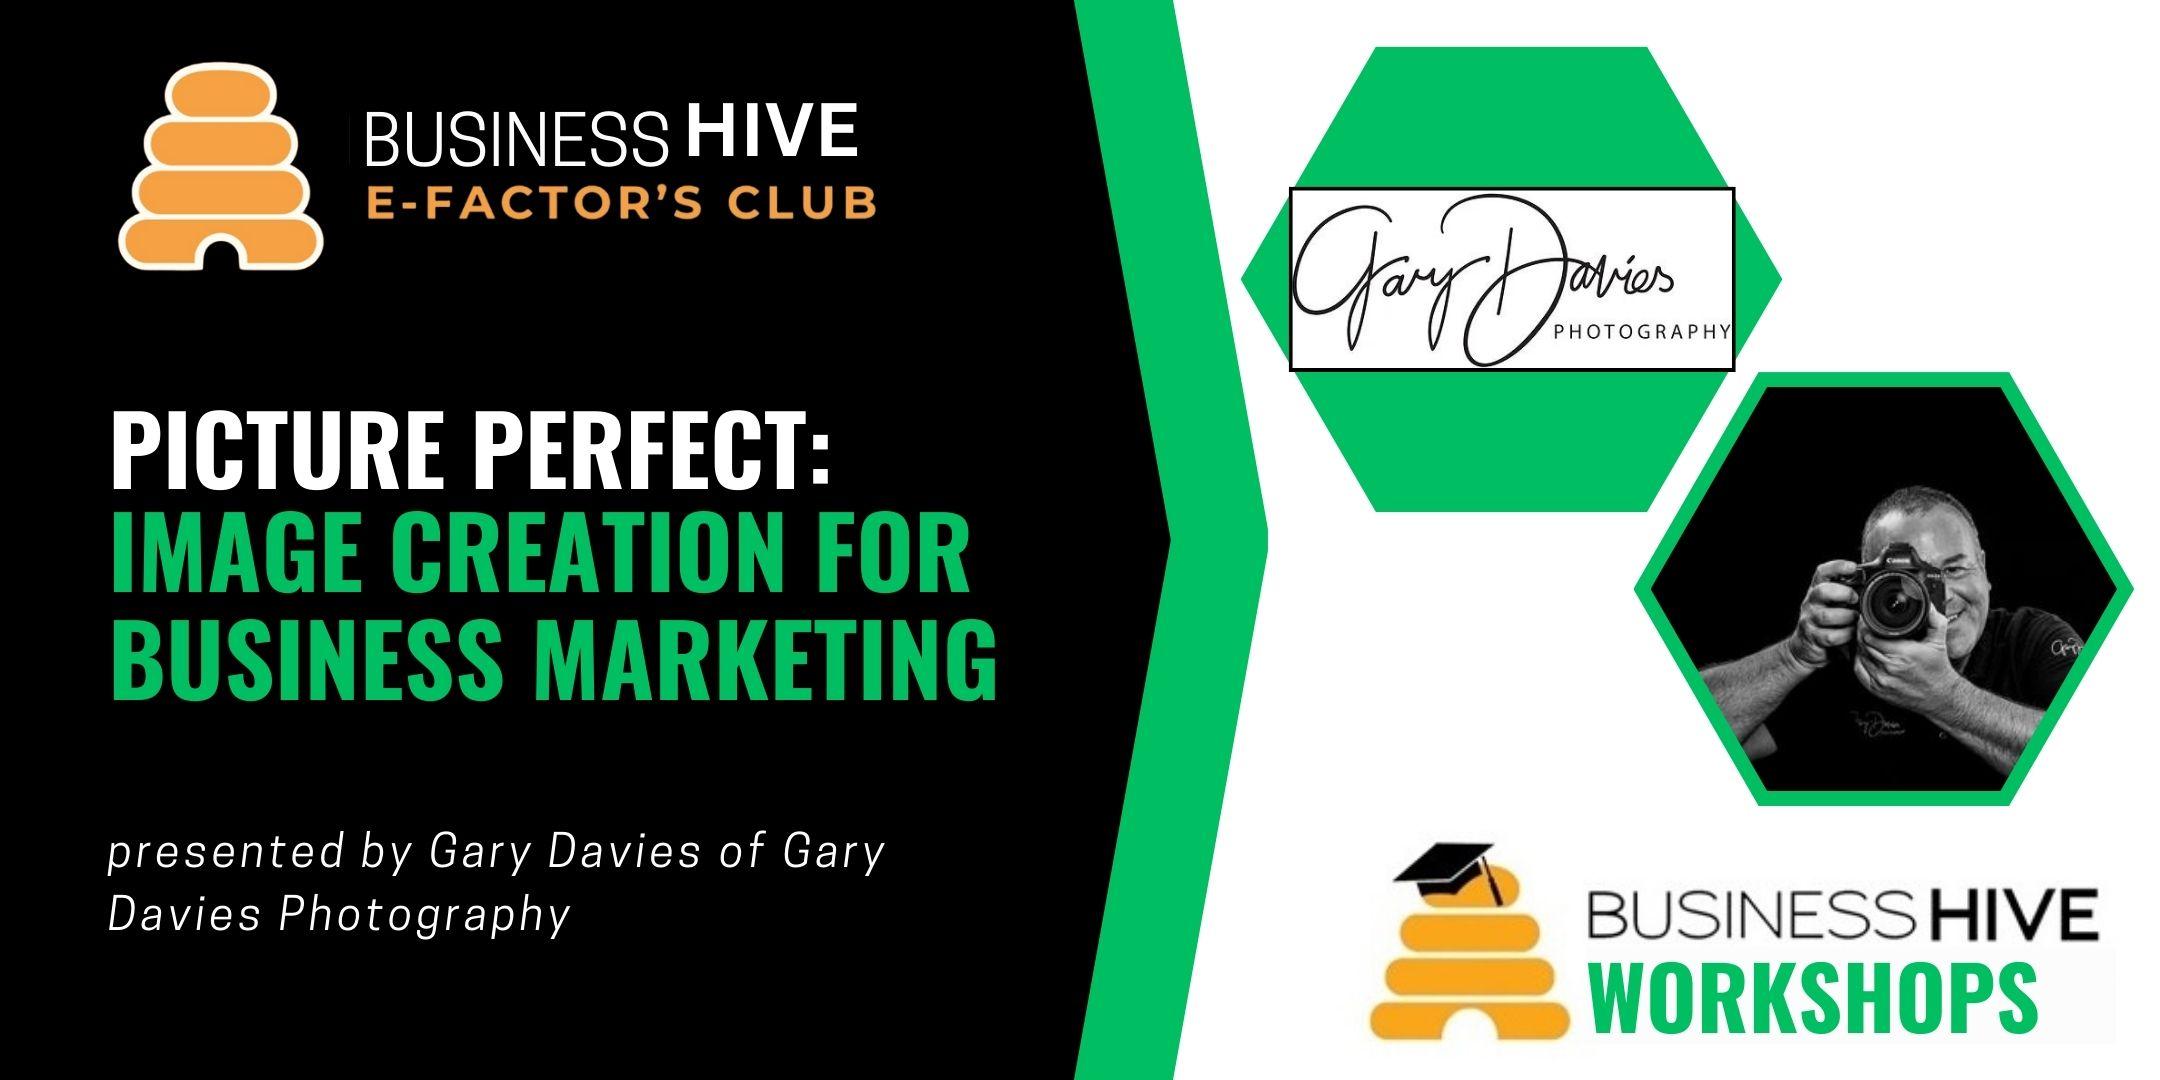 This is a promotional graphic for a workshop titled "Picture Perfect: Image Creation for Business Marketing," presented by Gary Davies of Gary Davies Photography, associated with the Business Hive E-Factor's Club.